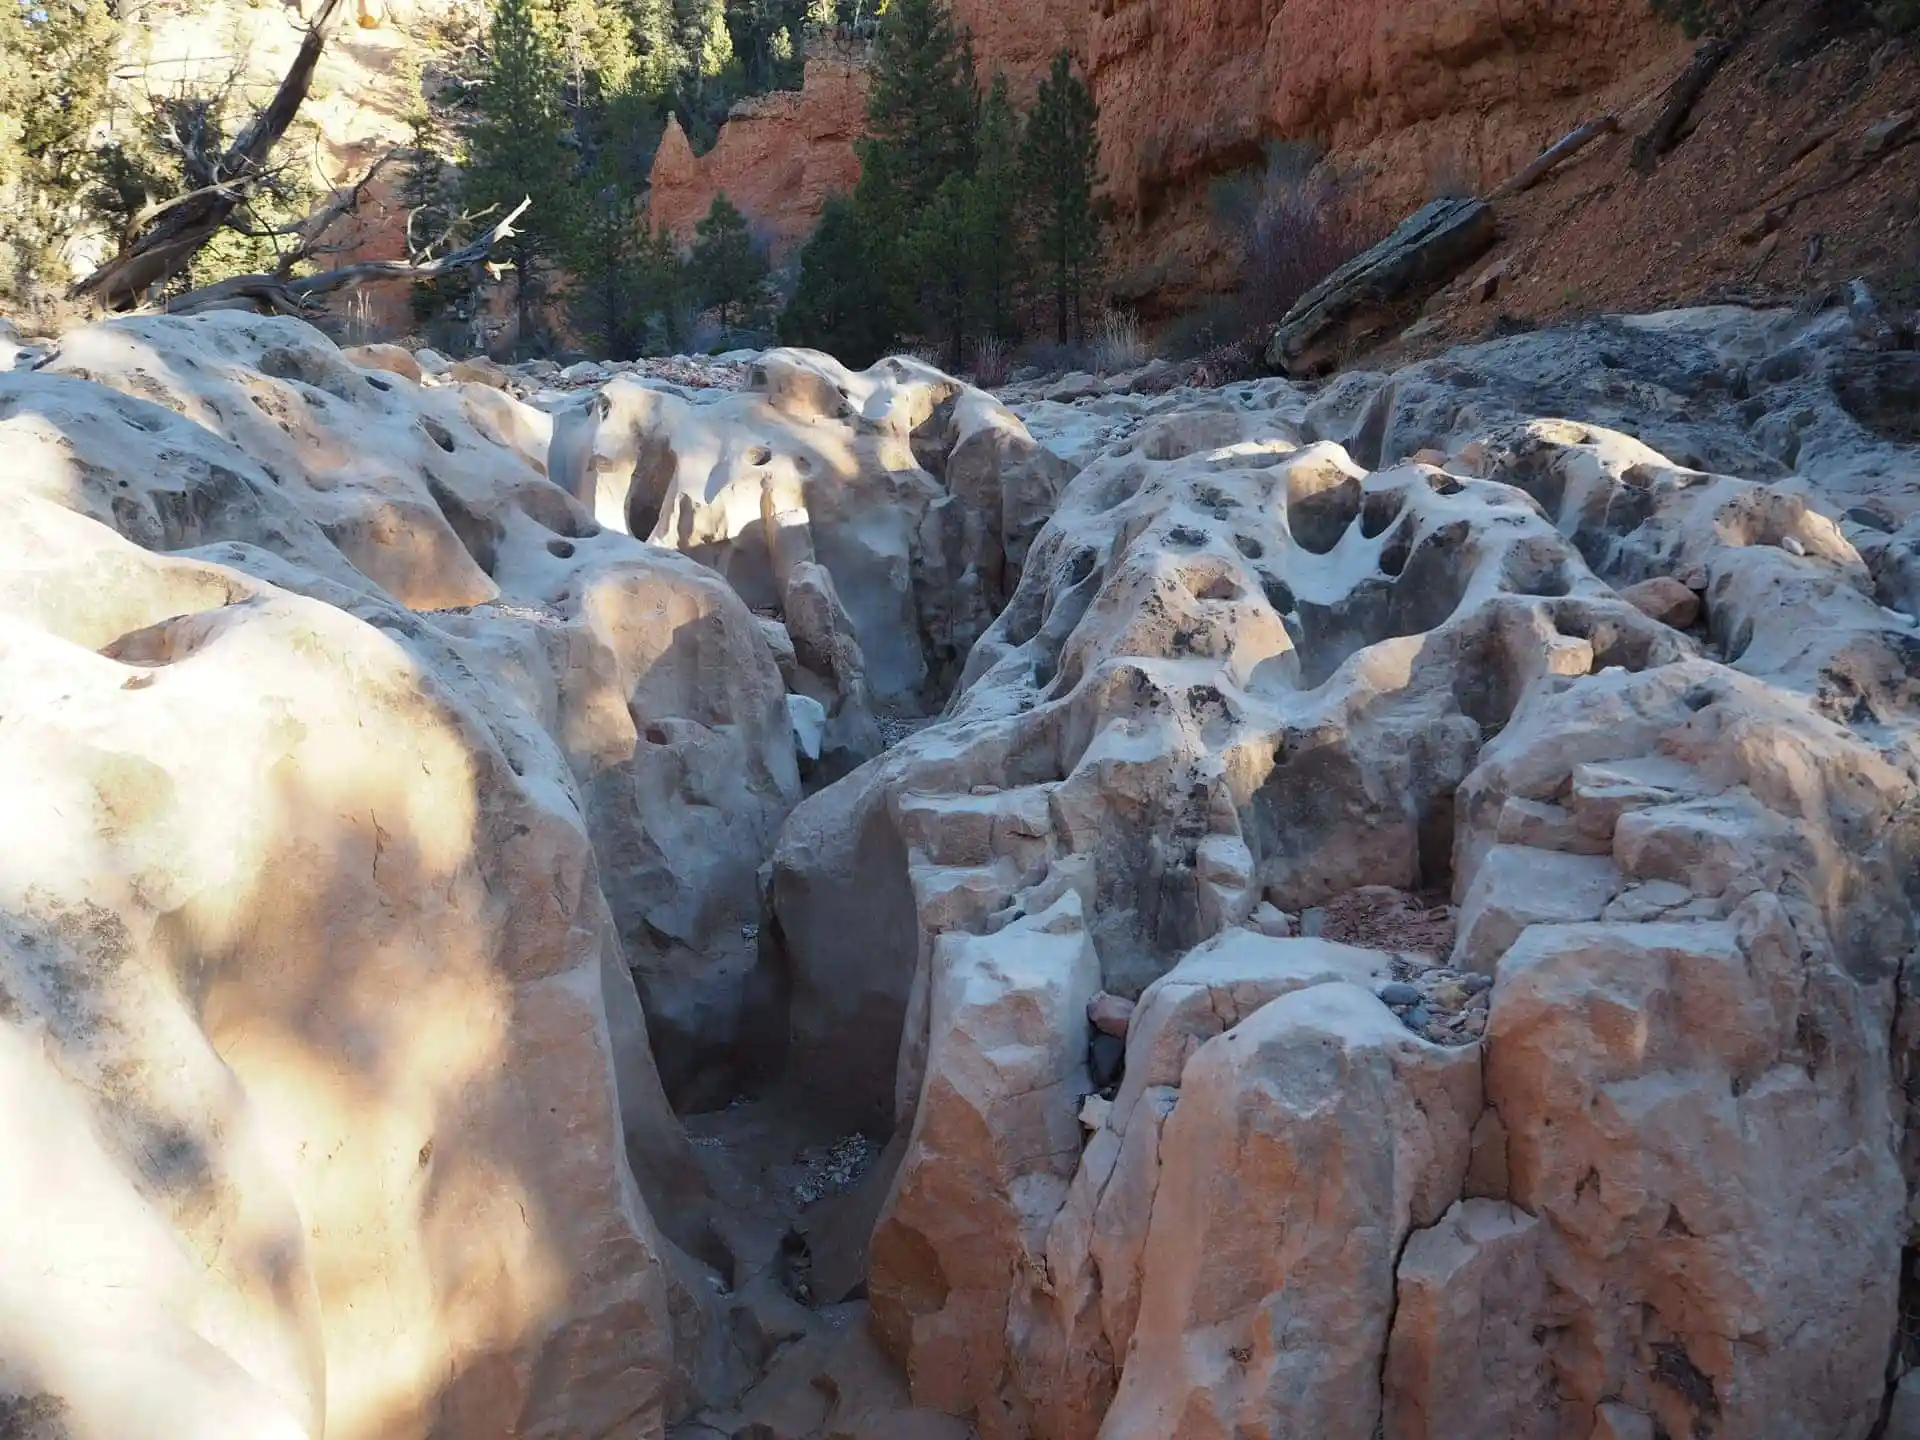 Heavy erosion in the sandstone is starting to form a slot canyon